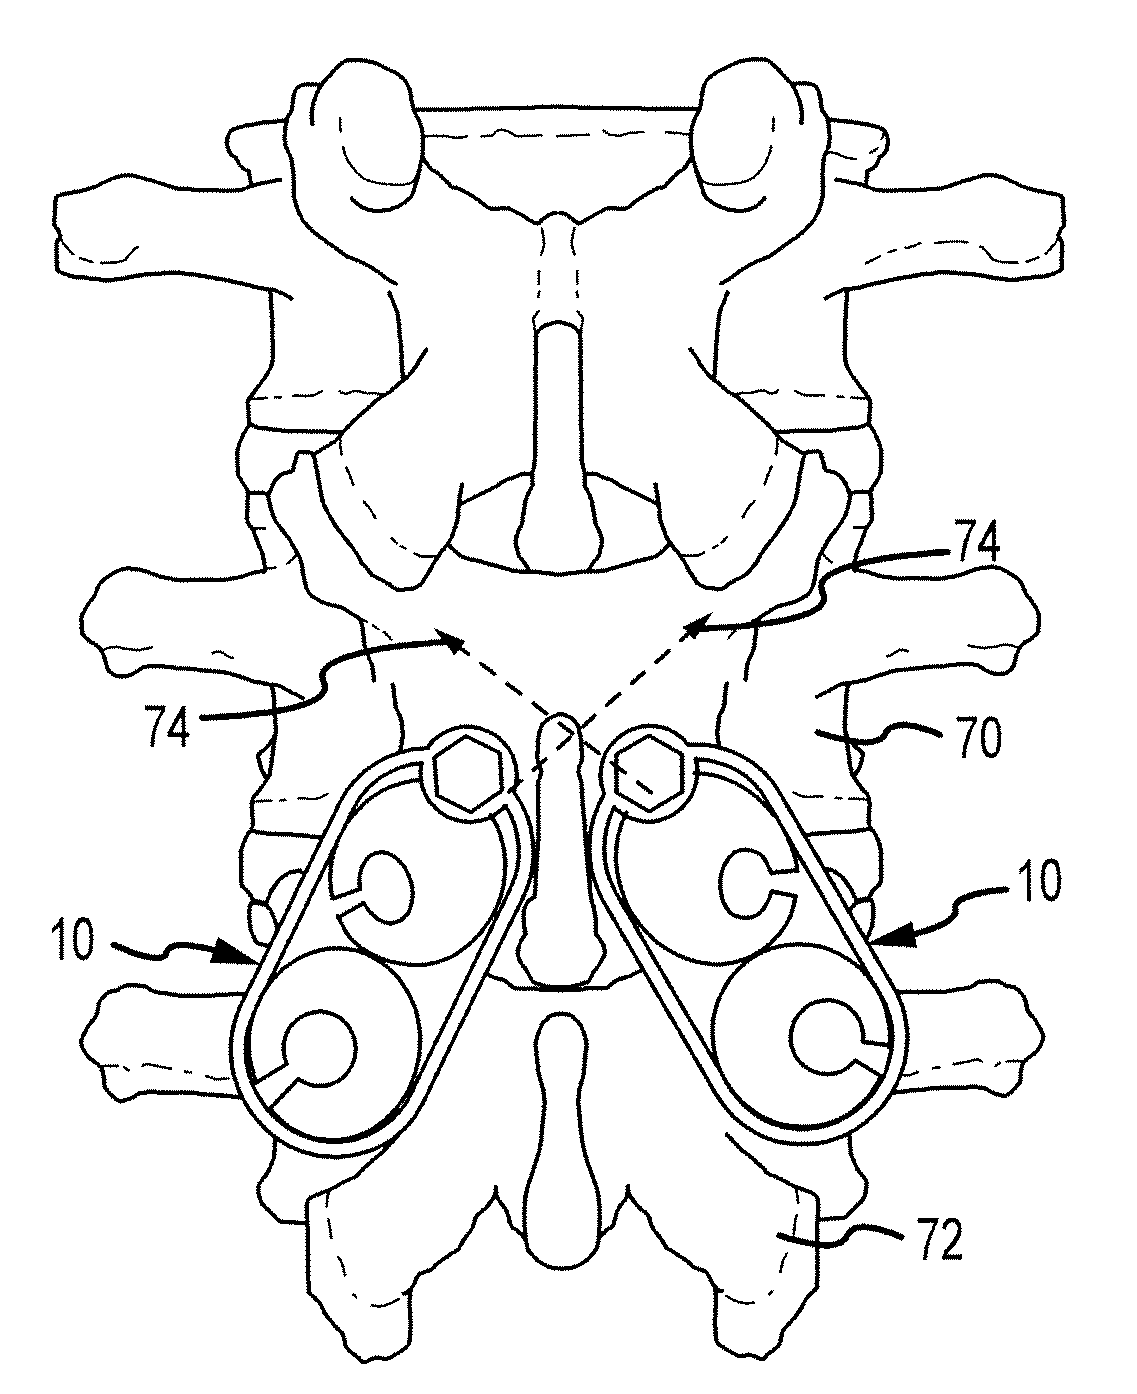 System and method for spinal instrumentation